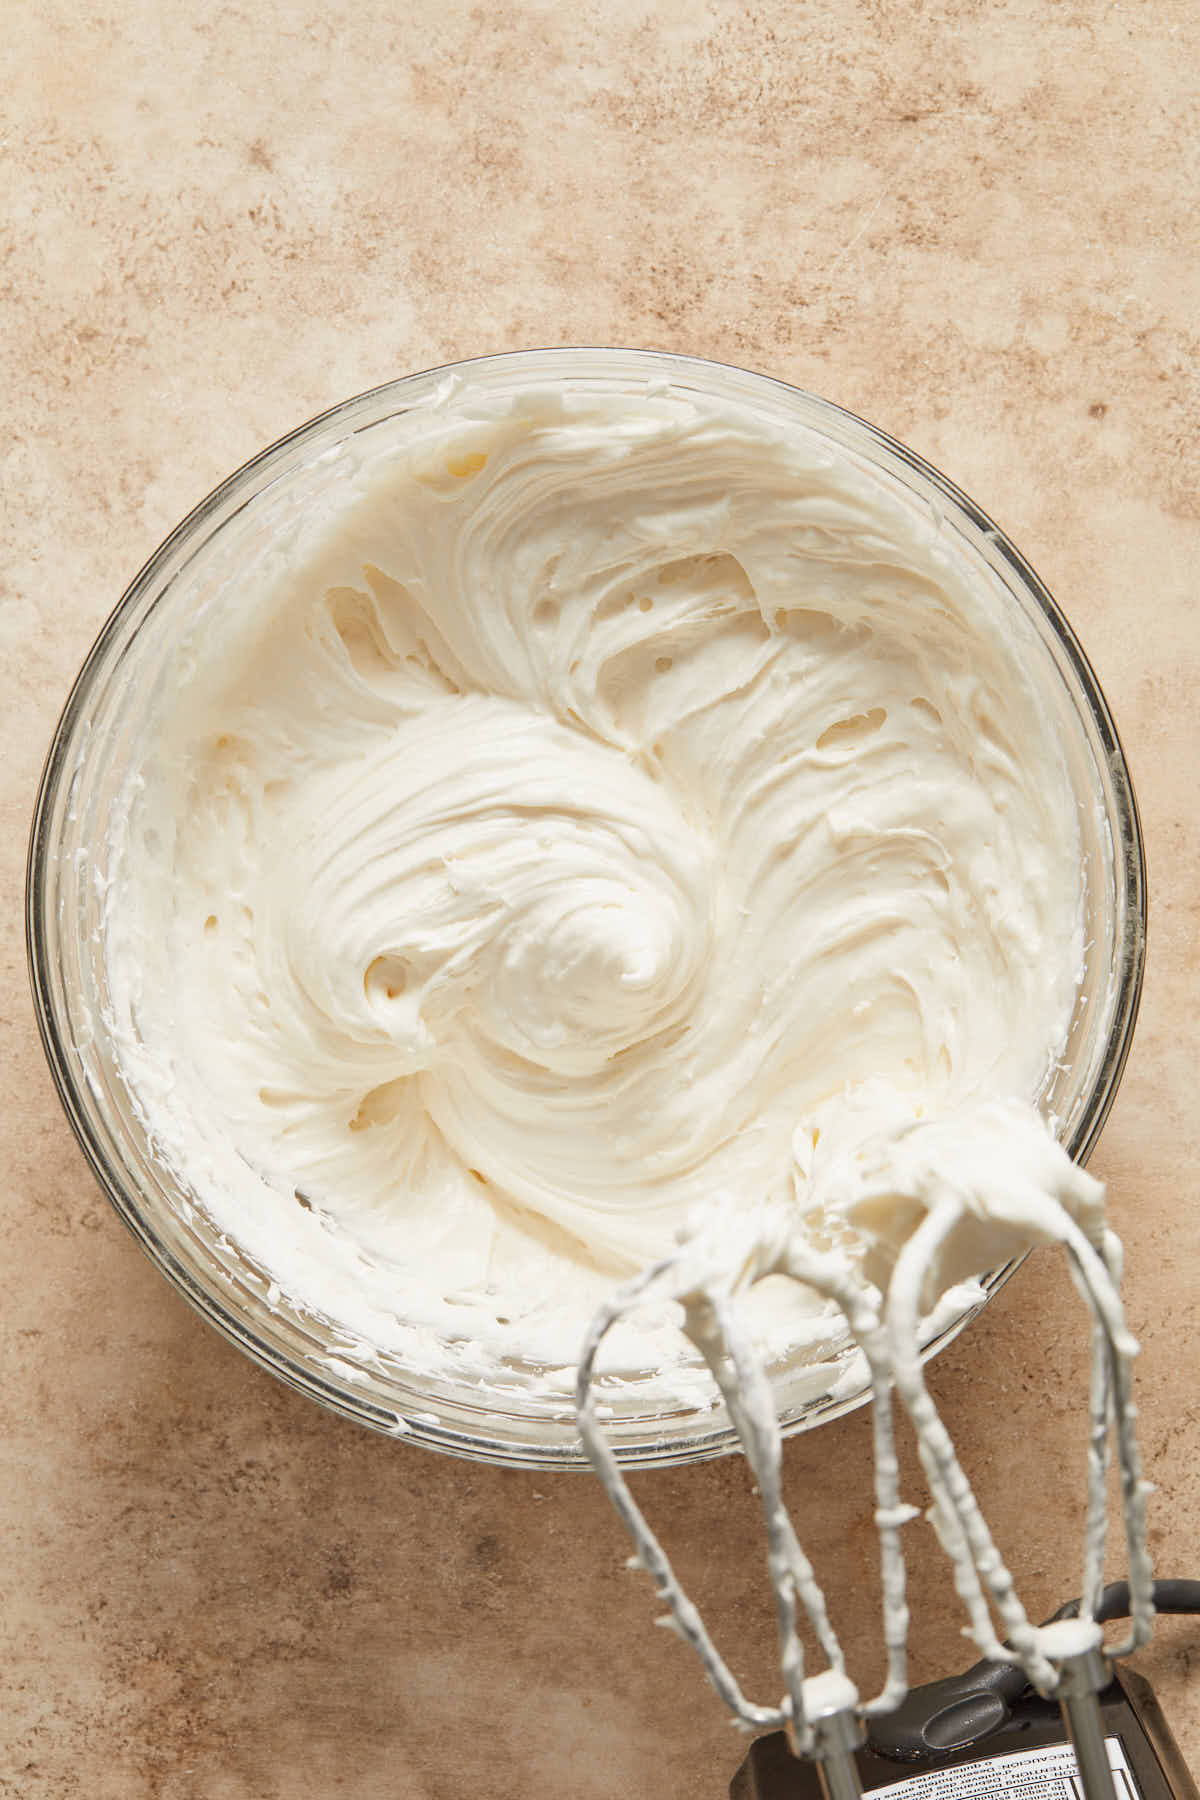 Cream cheese frosting in a glass bowl with beaters next to it.